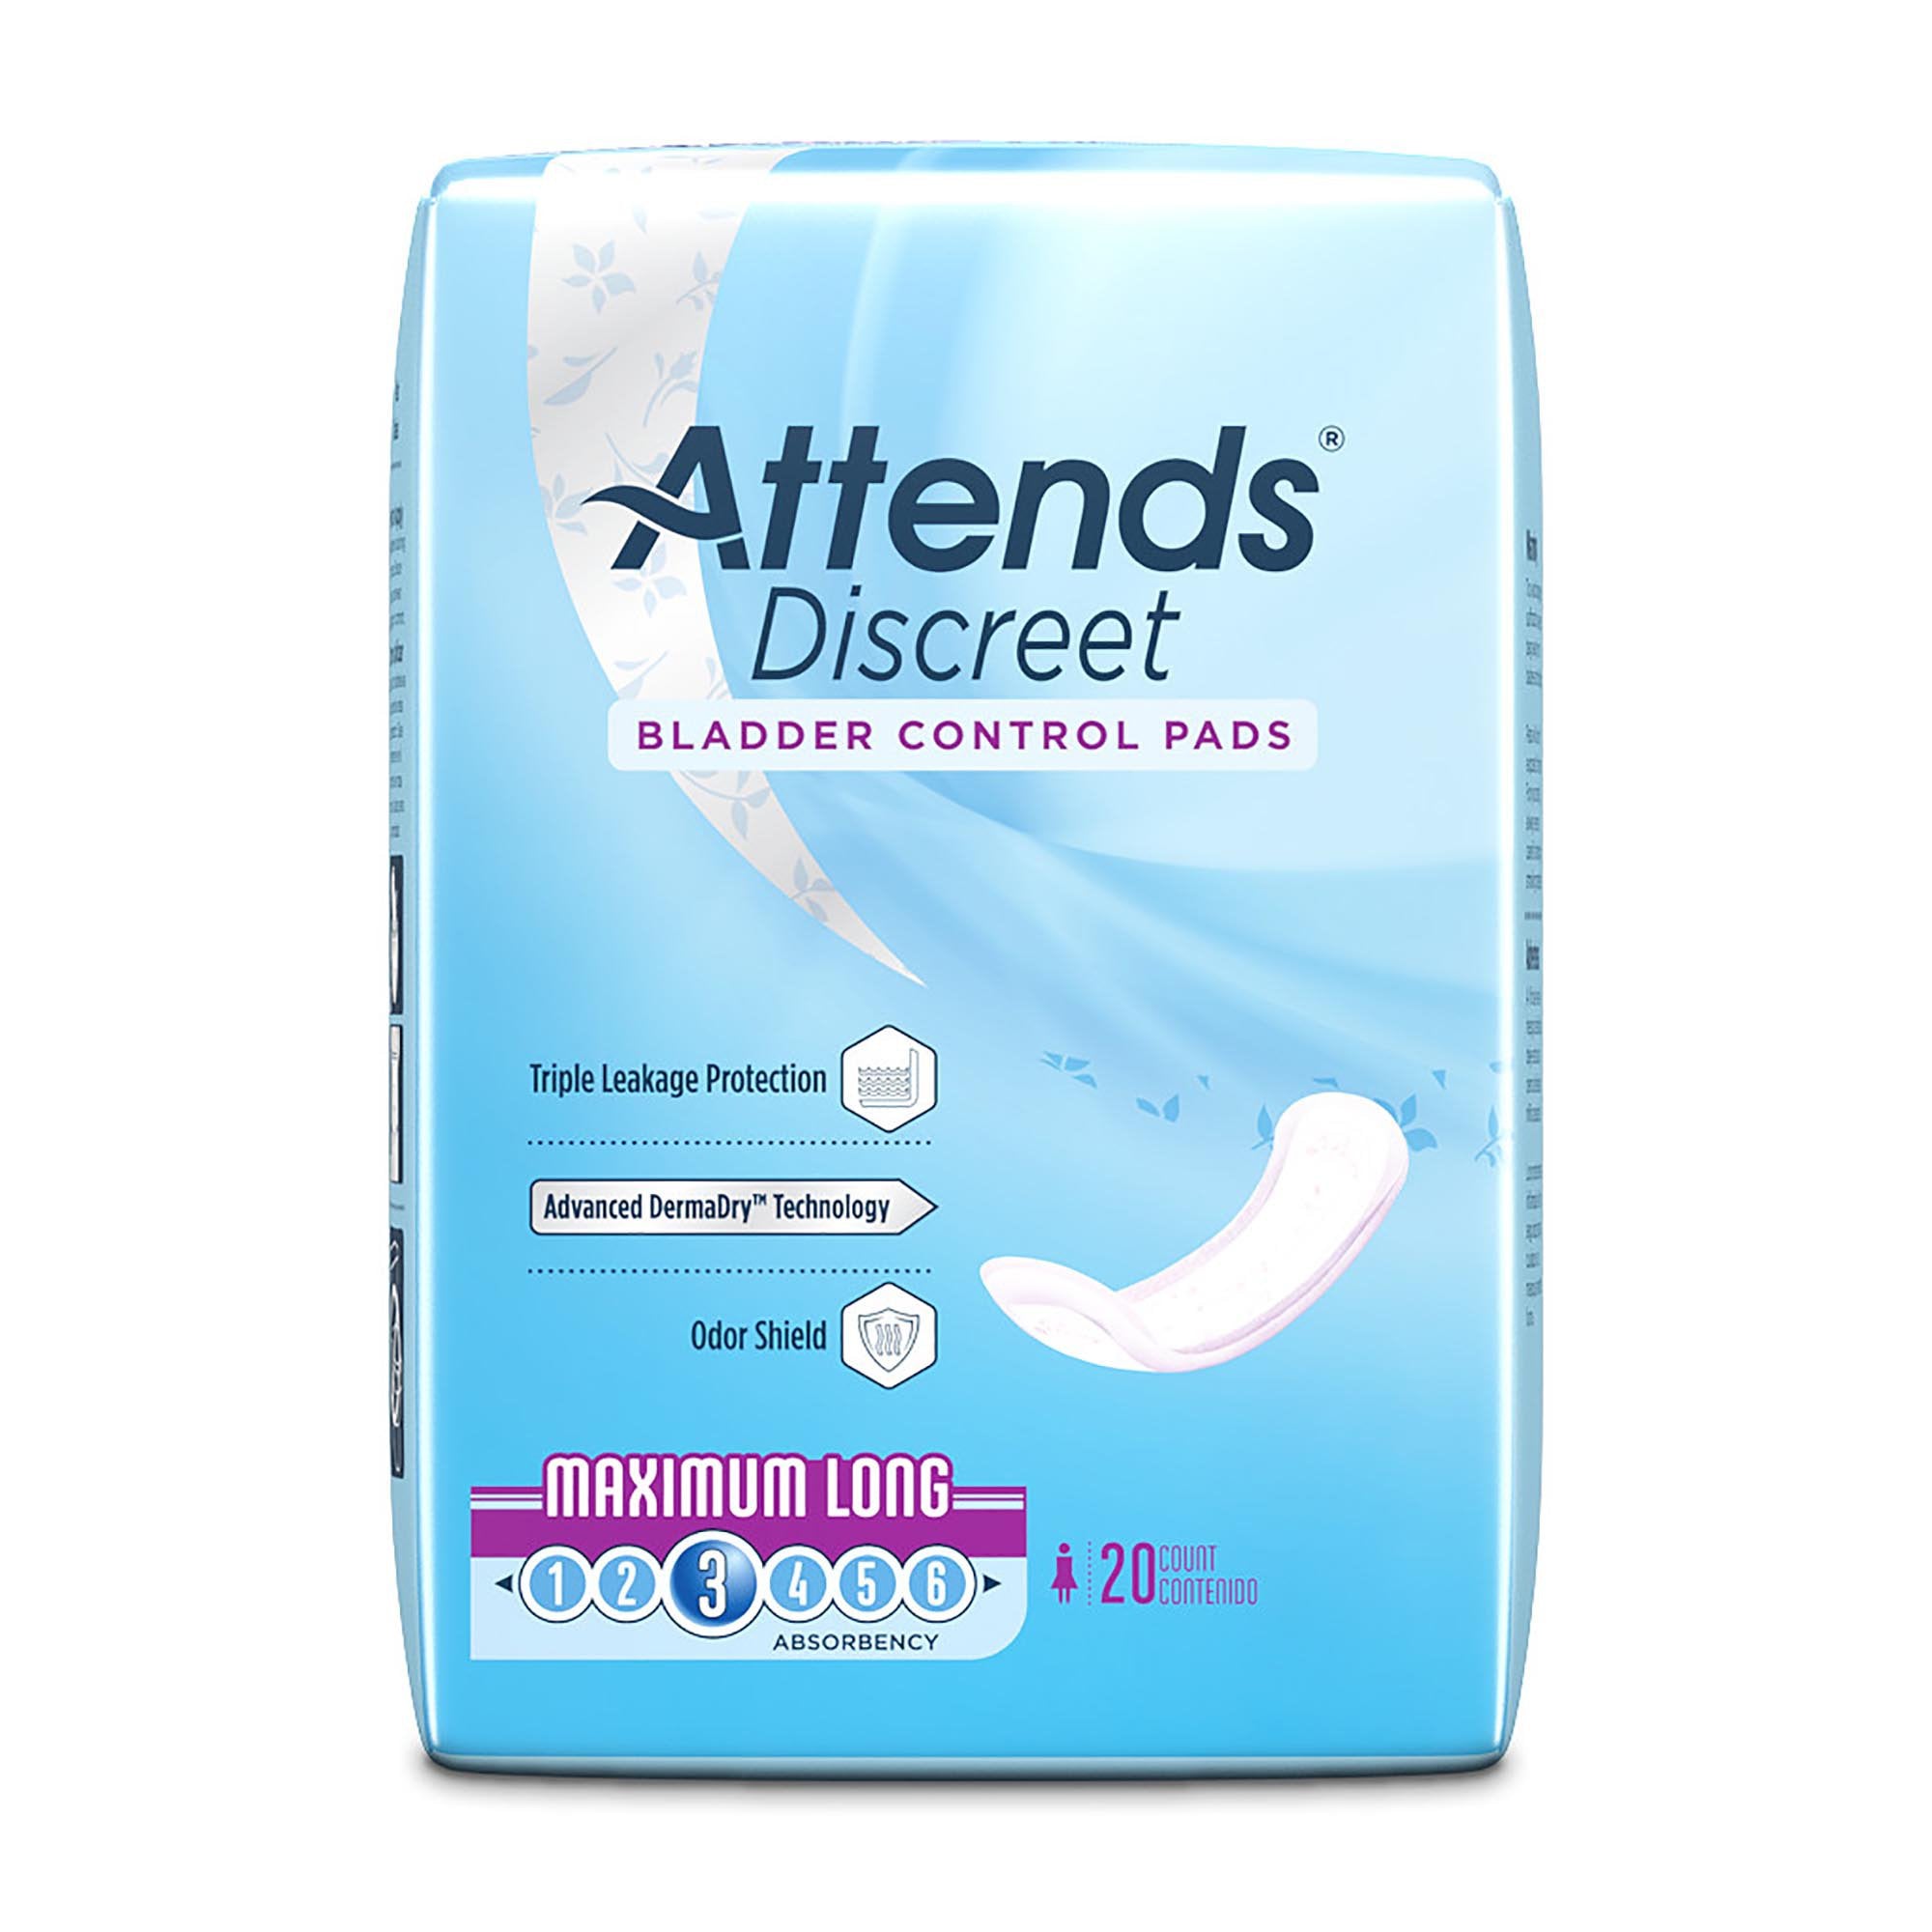 Bladder Control Pad Attends® Discreet 14-1/2 Inch Length Moderate Absorbency Polymer Core One Size Fits Most